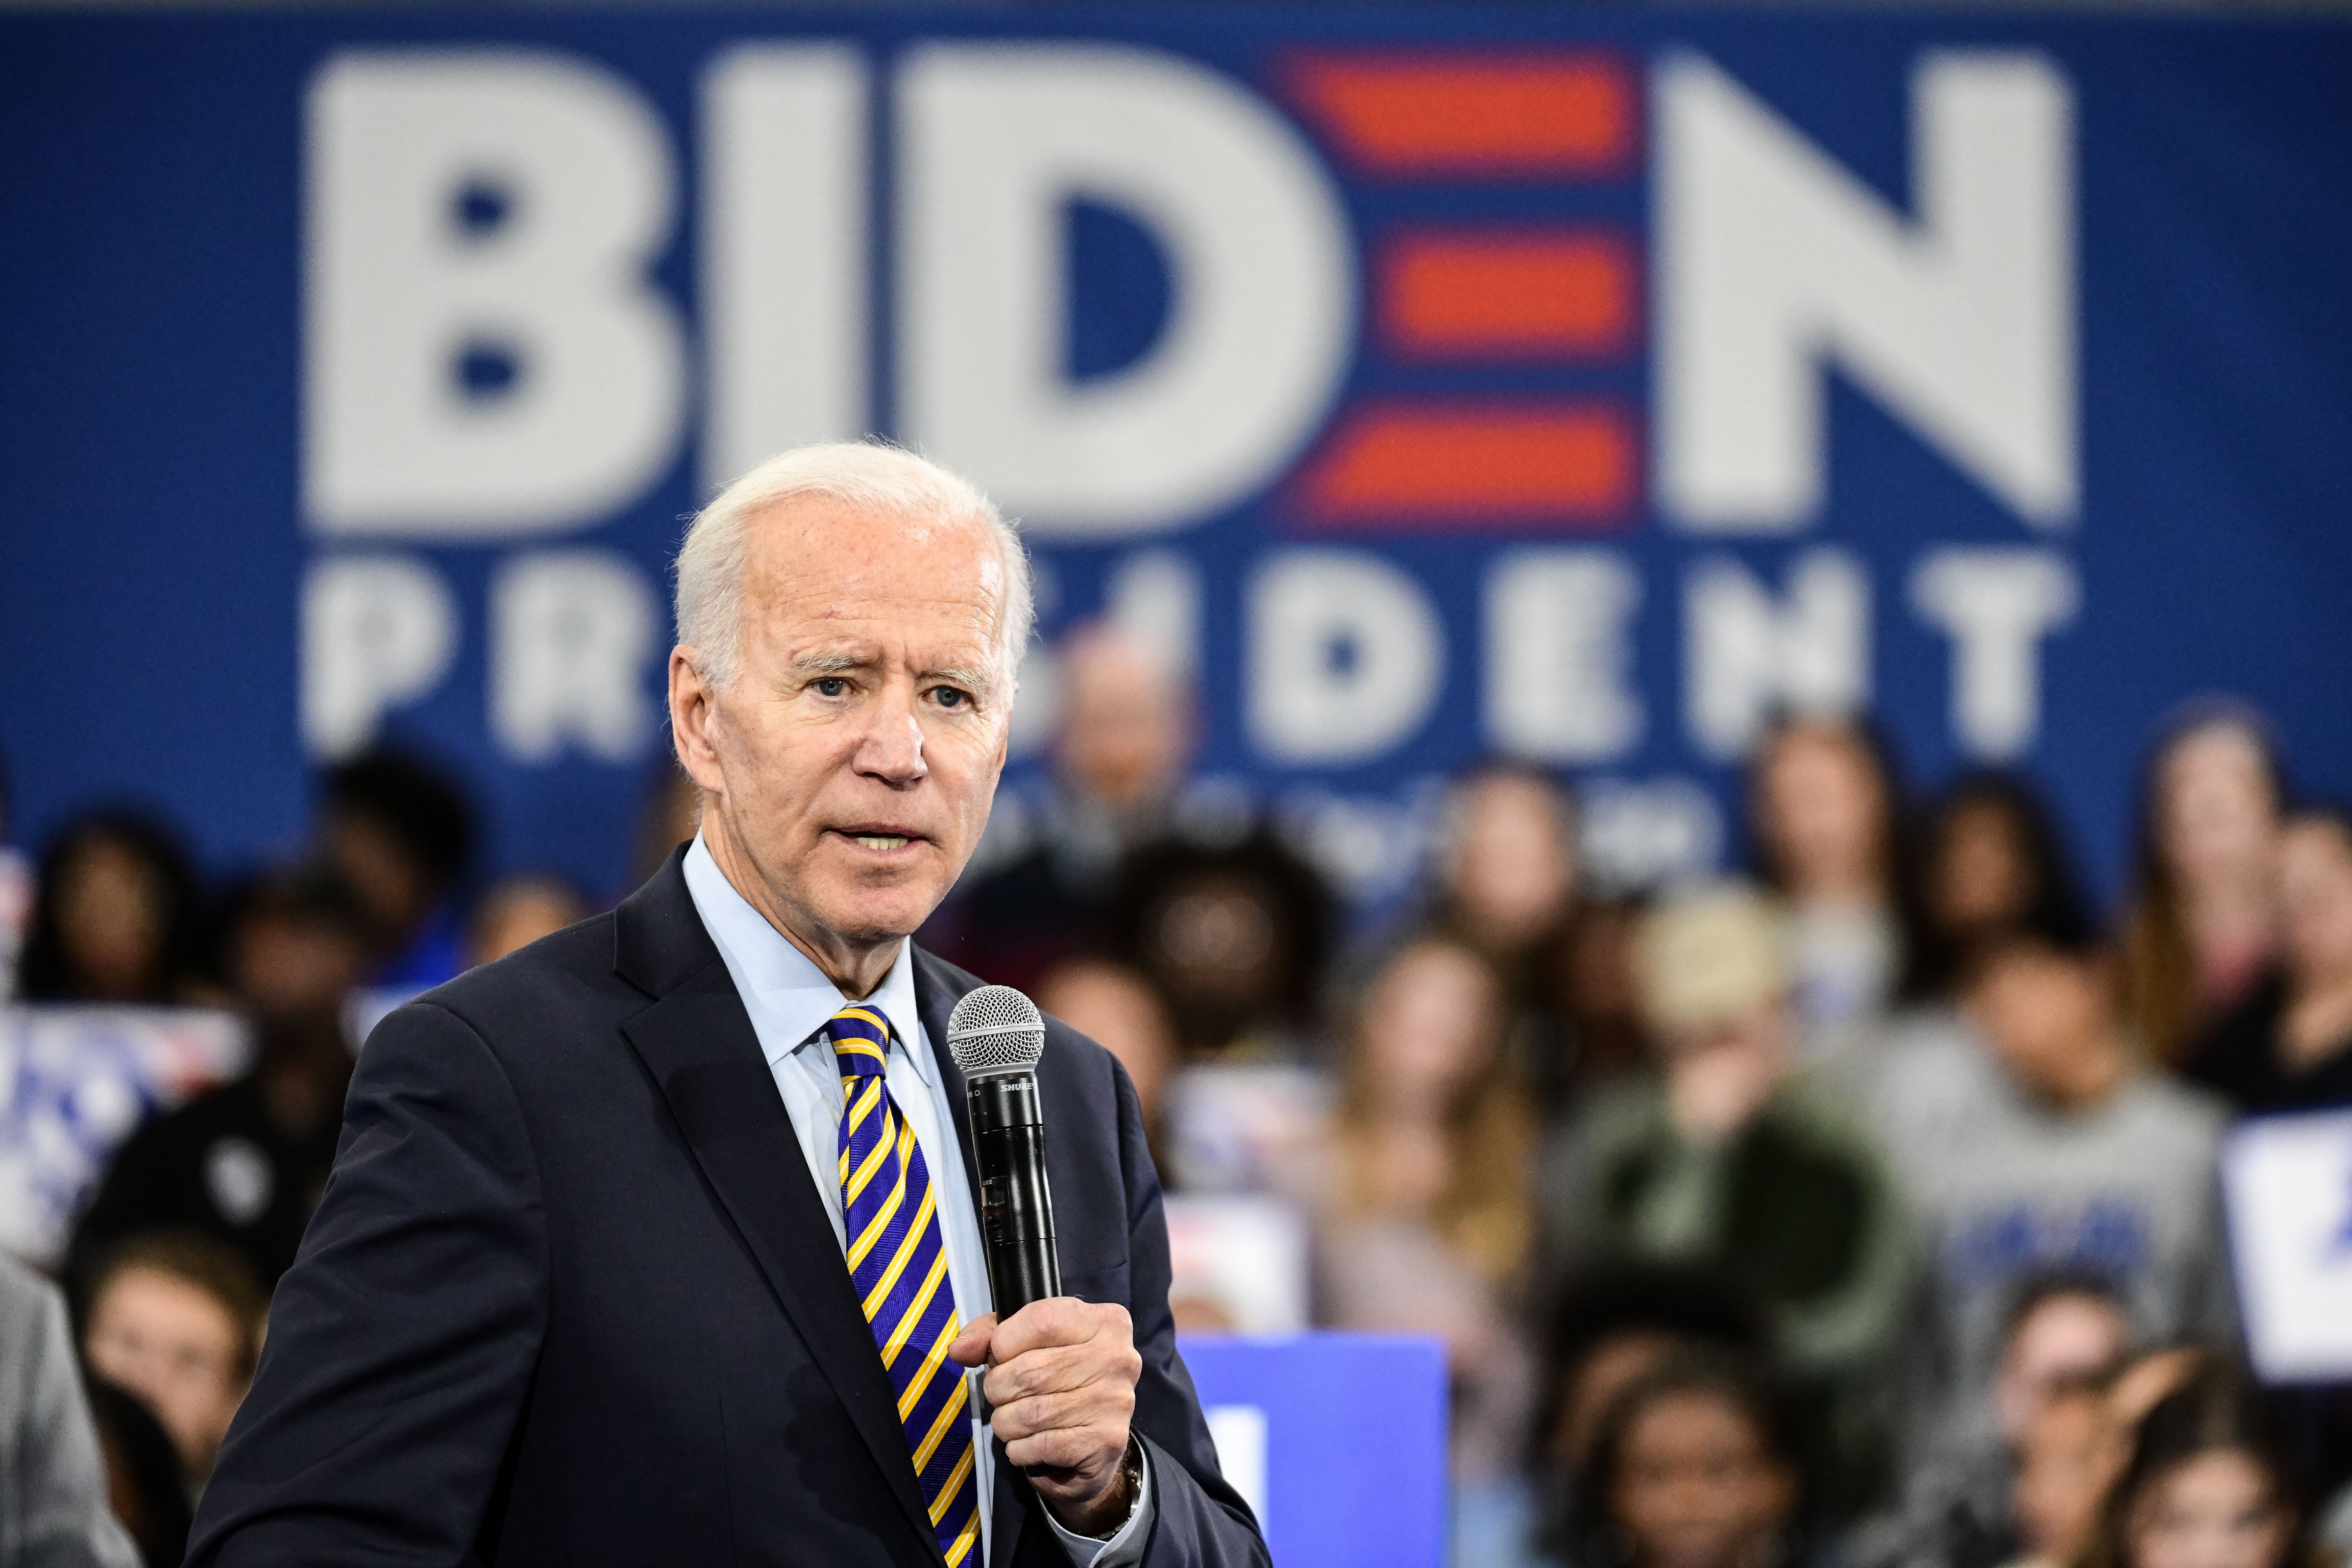 Presidential Candidate Joe Biden Holds A Town Hall At Lander University In South Carolina